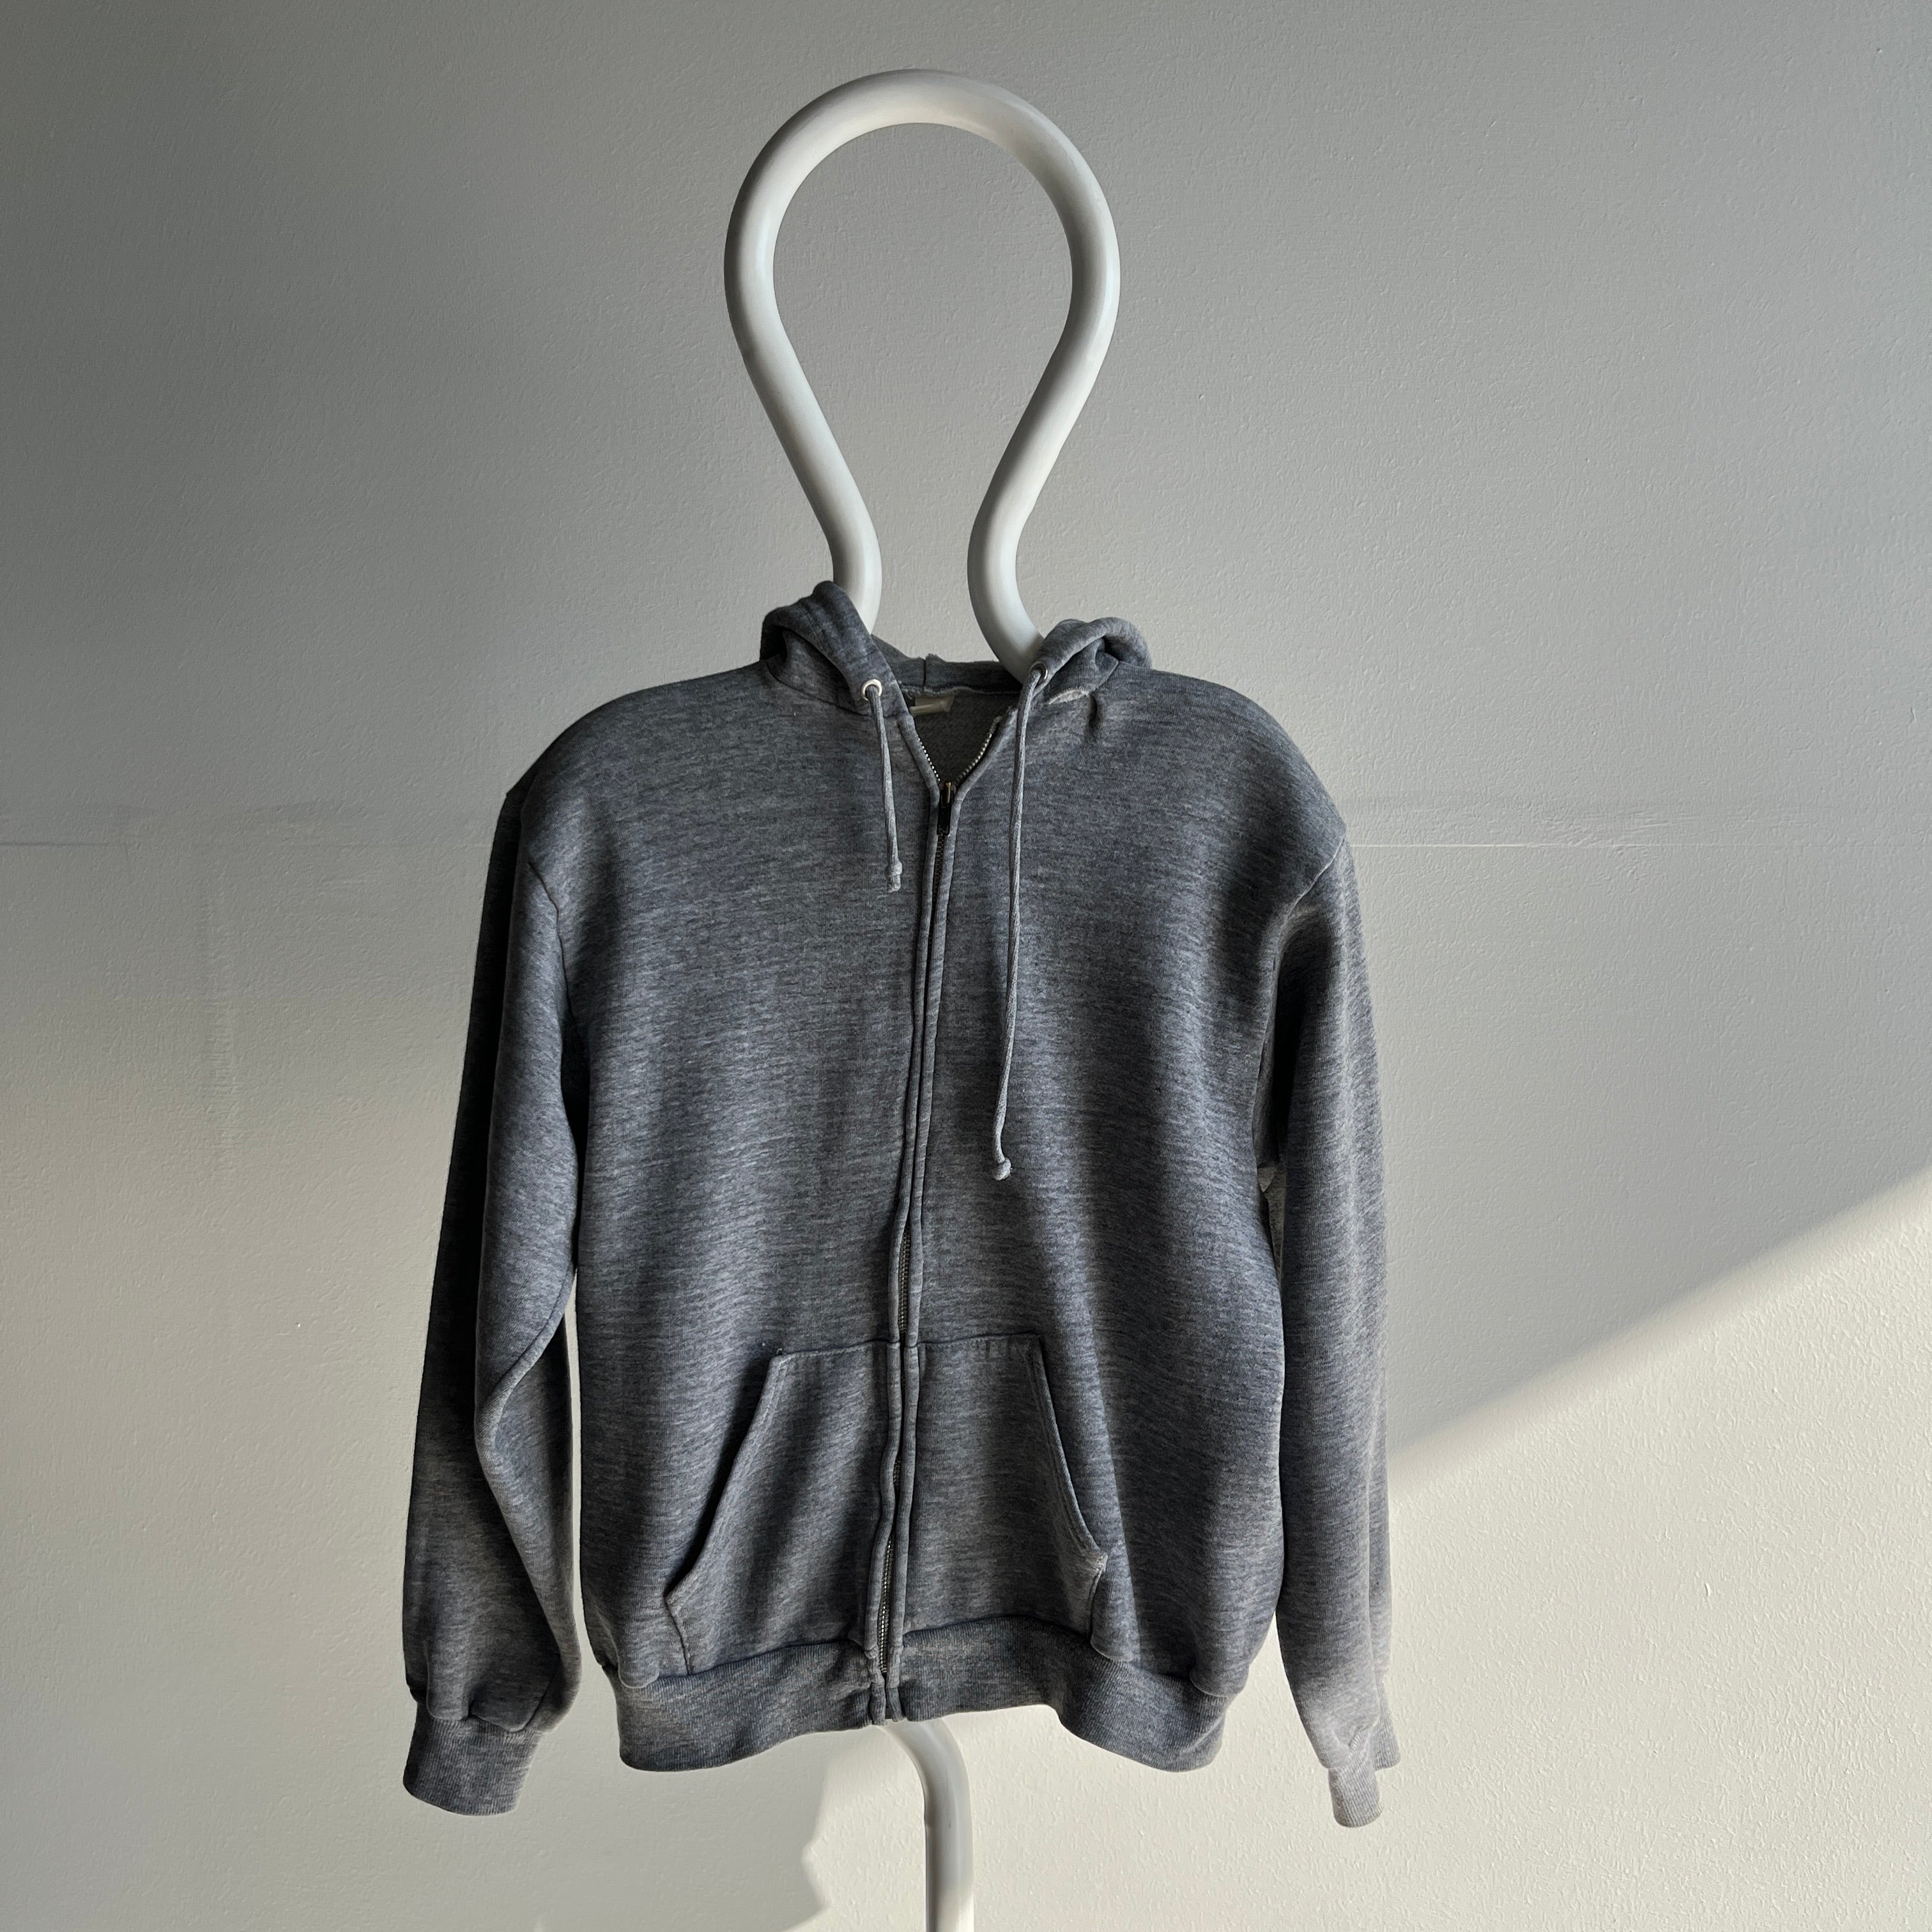 1970s The Worn Out Gray Zip Up Hoodie of *Your* Dreams Sweatshirt